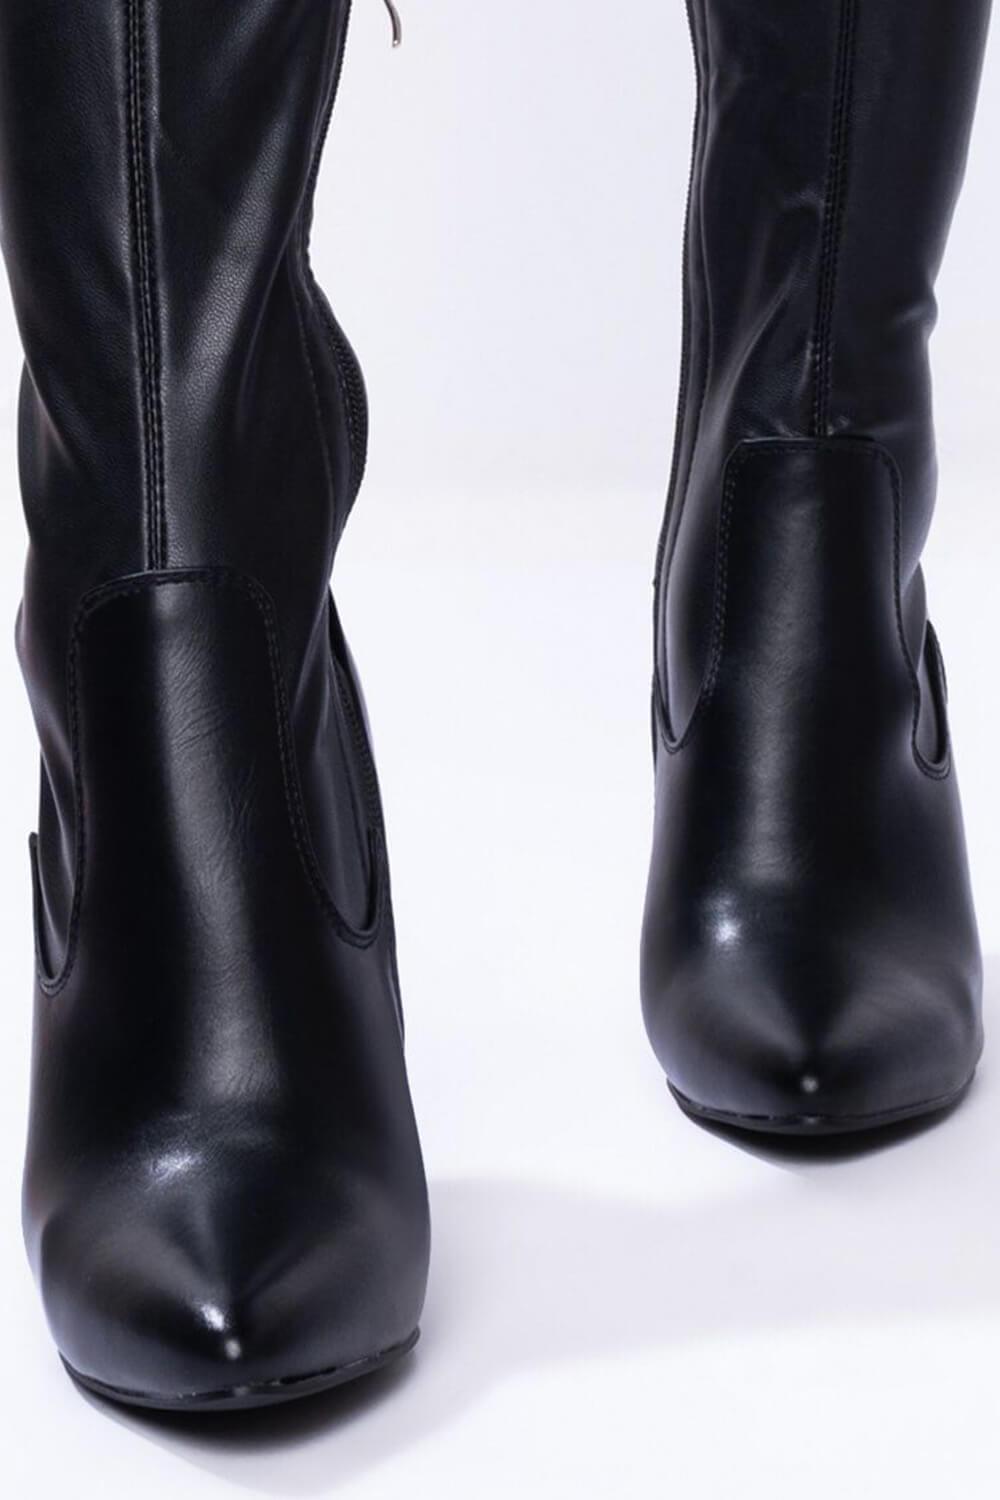 Chelsea Boots, Beatle Boots, Ankle Boots and Booties. – vintage90s.com